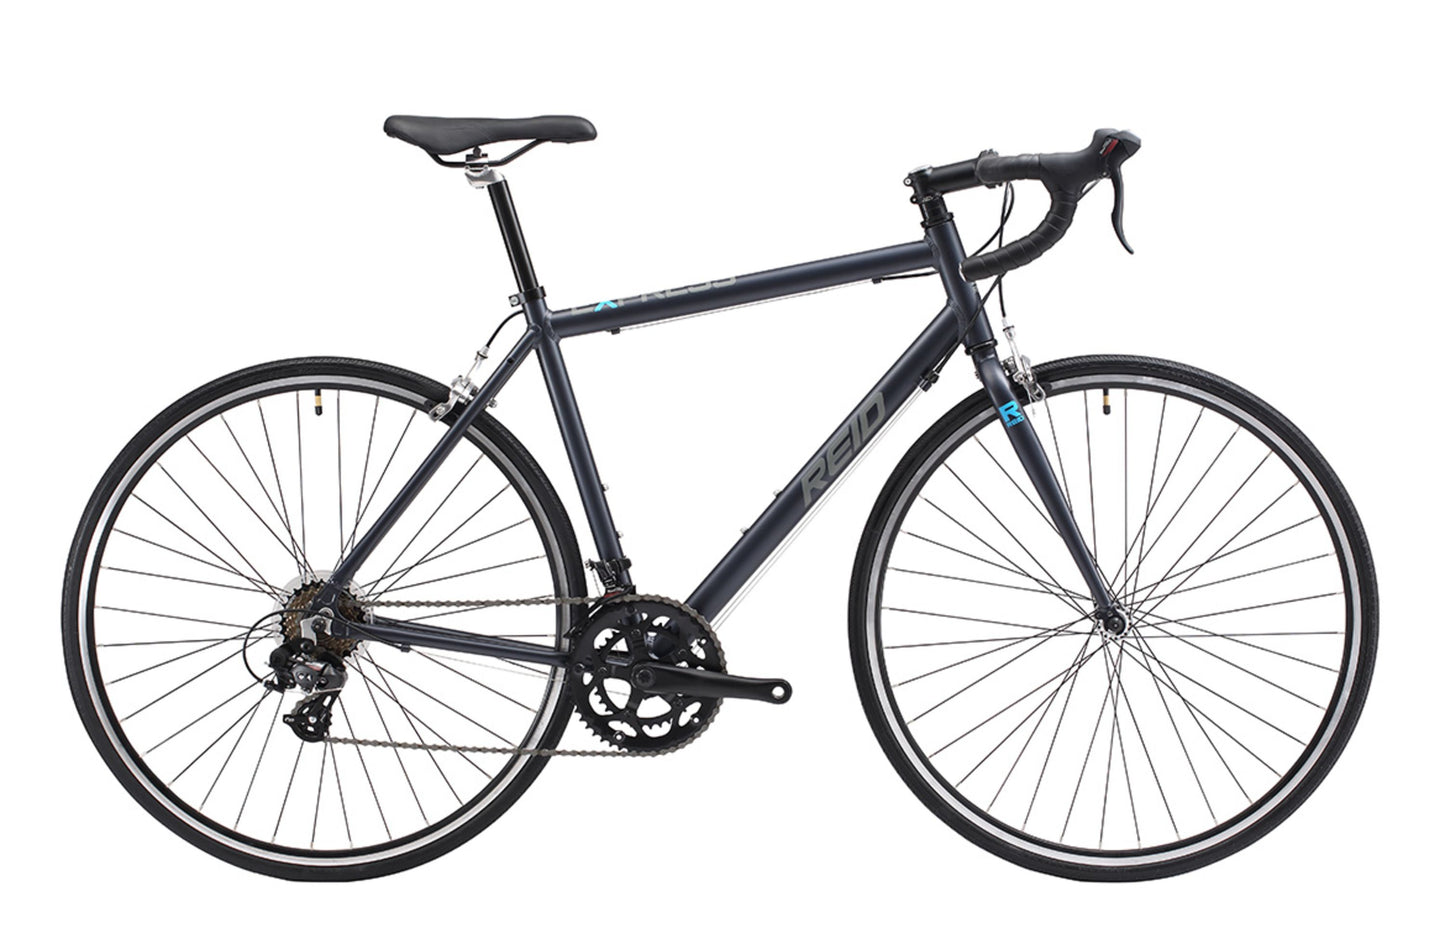 The Express Road in Gunmetal Grey with Shimano 7-speed gearing from Reid Cycles Australia